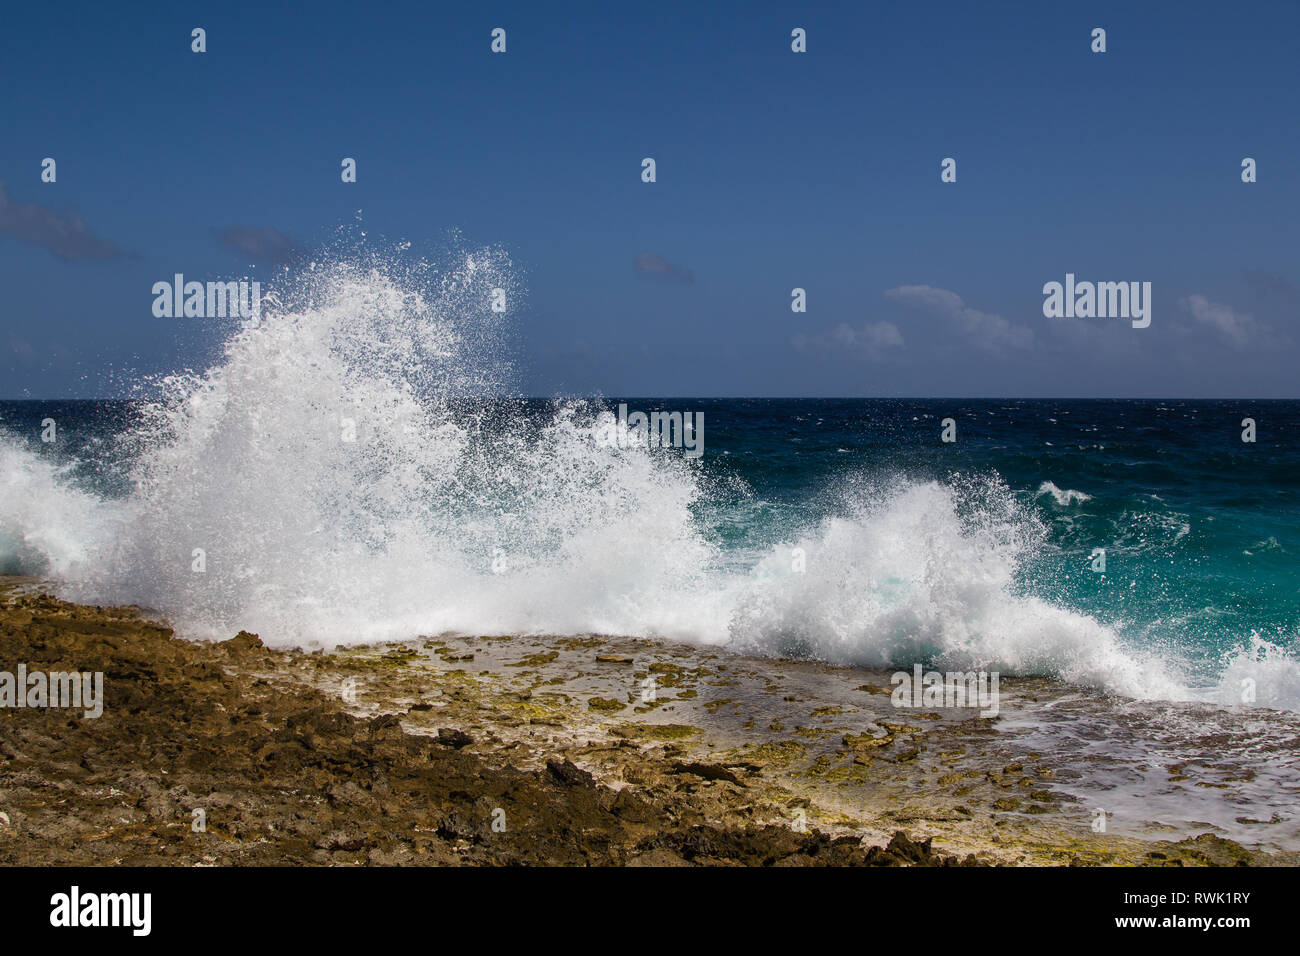 Wild and high waves breaking at the rough coastline of the Caribbean east coast of the Caribbean island of Bonaire Stock Photo